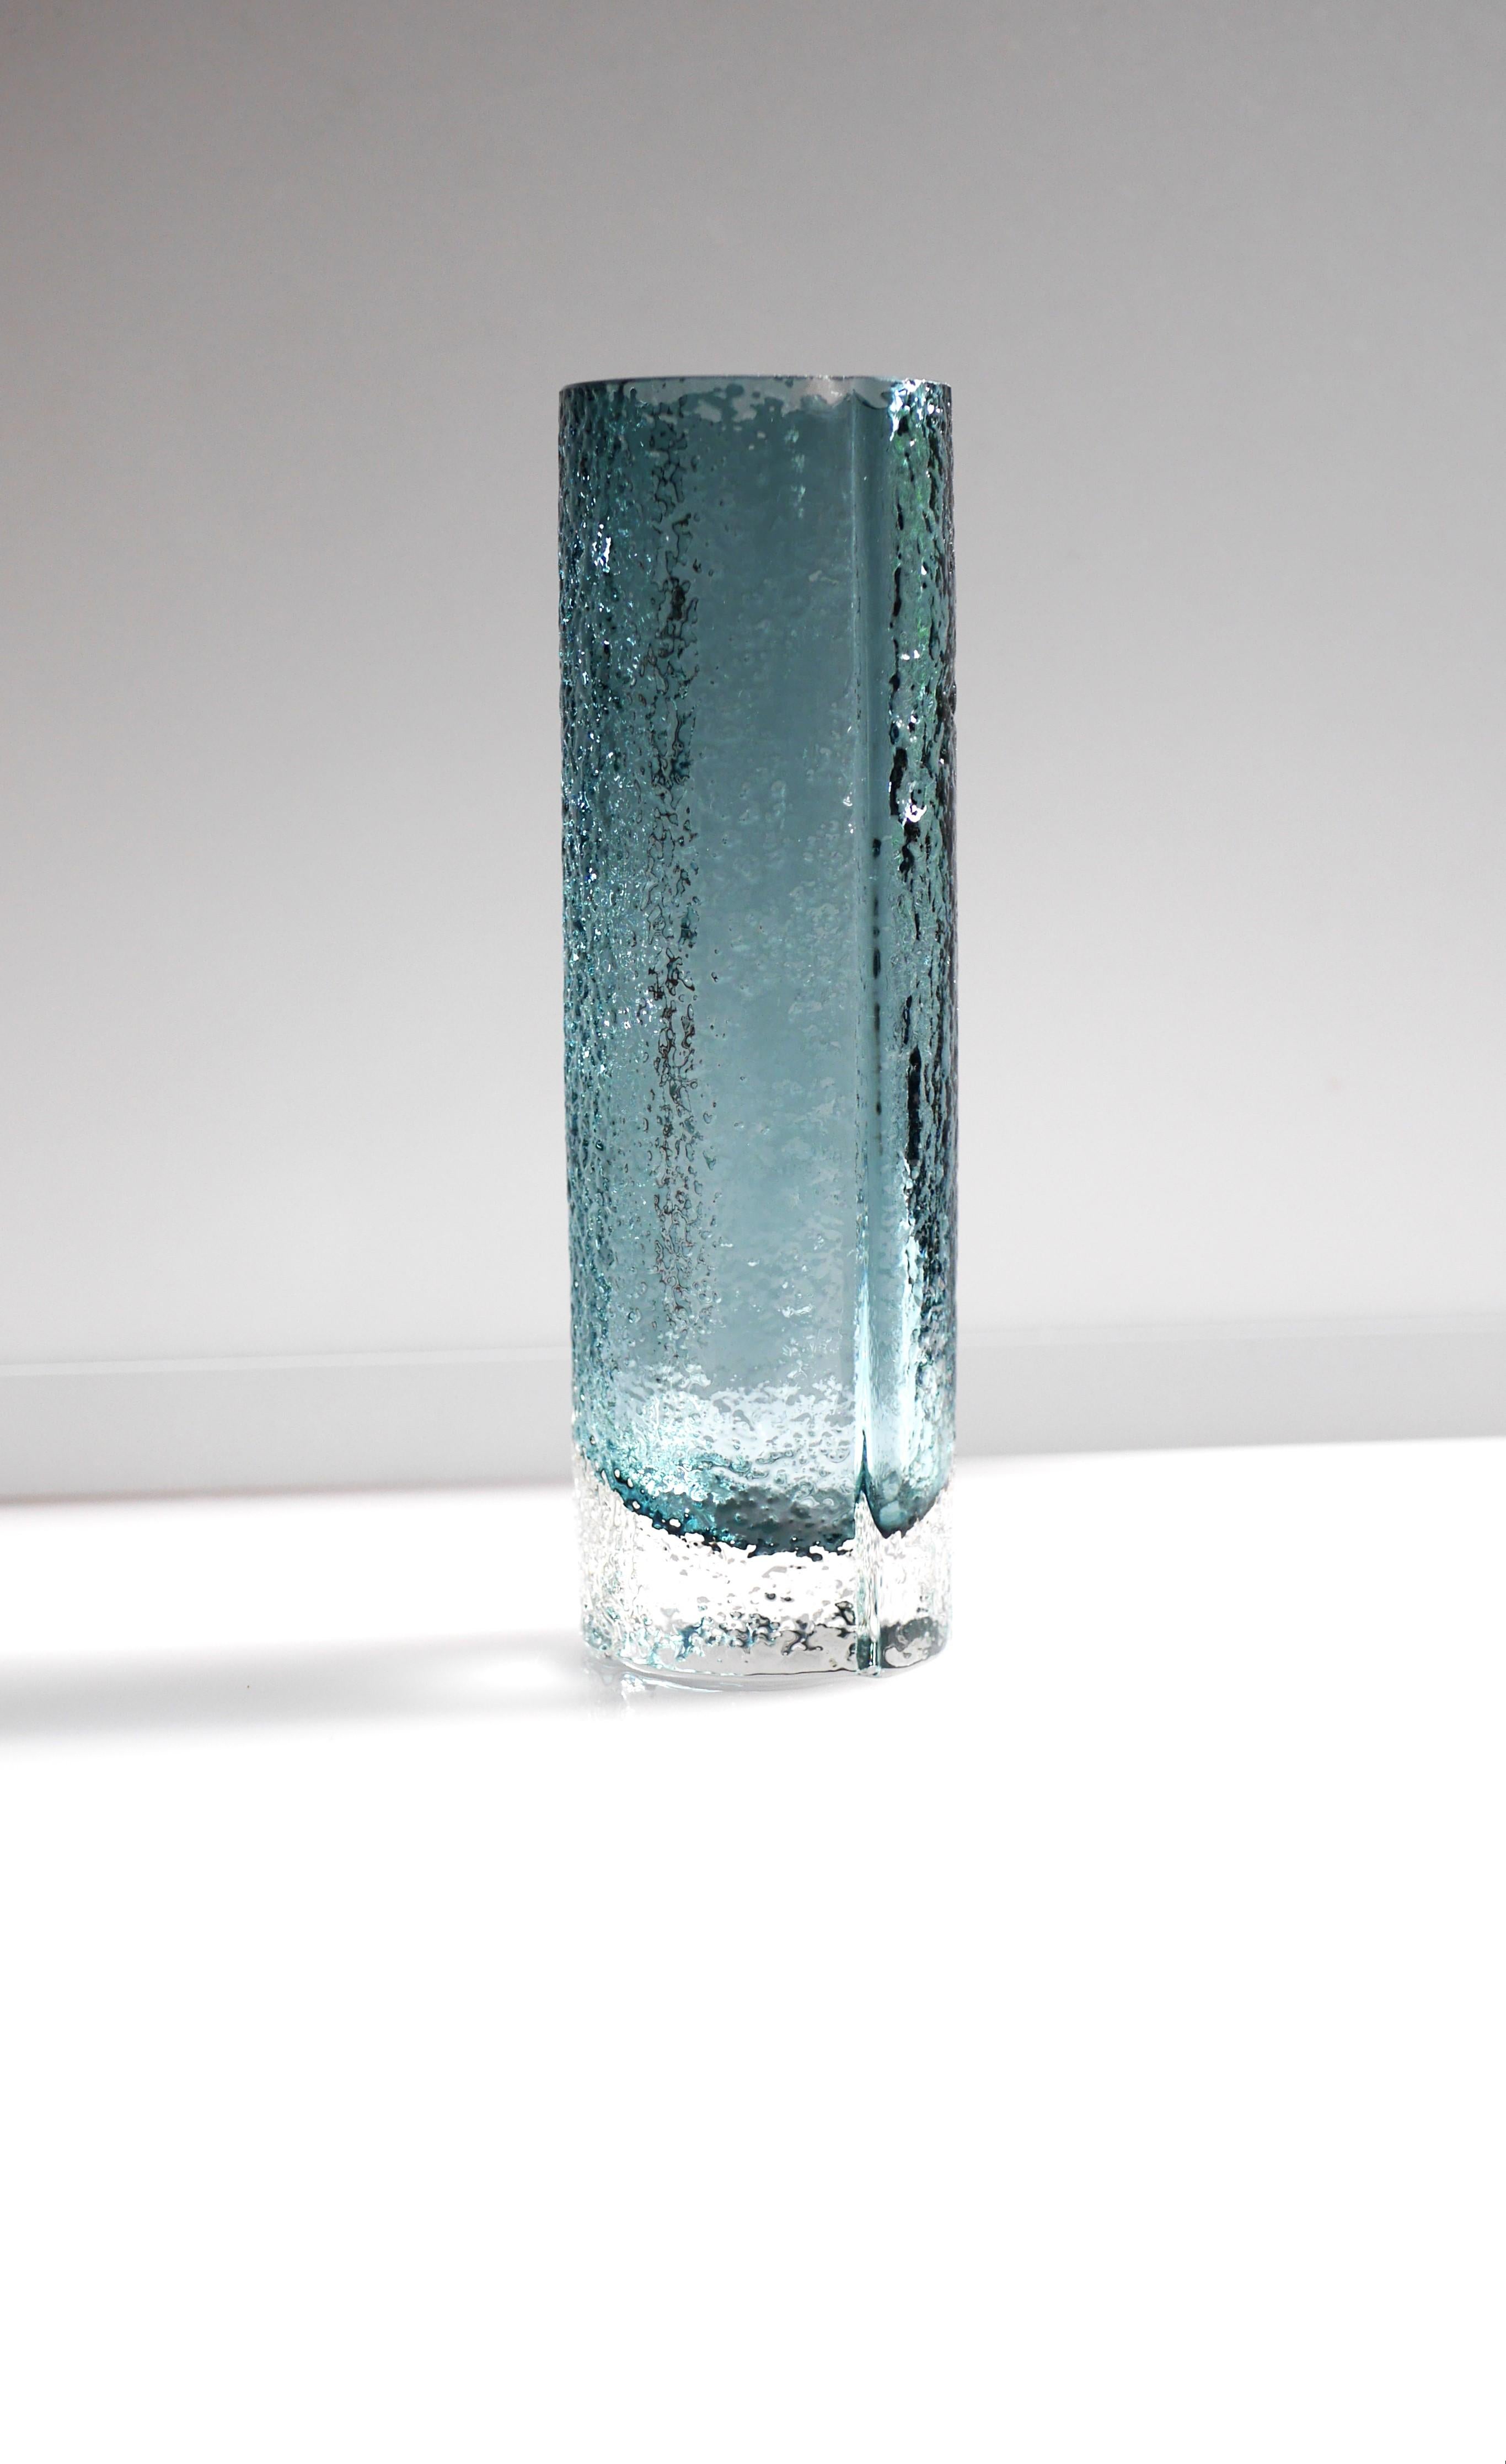 A vintage modernist Finnish art glass vase from the prestigious designer Tamara Aladin.  This vase has the most amazing color, it has a gorgeous grey or pale blue color, covered with clear glass.  This is a very unusual color combination for this